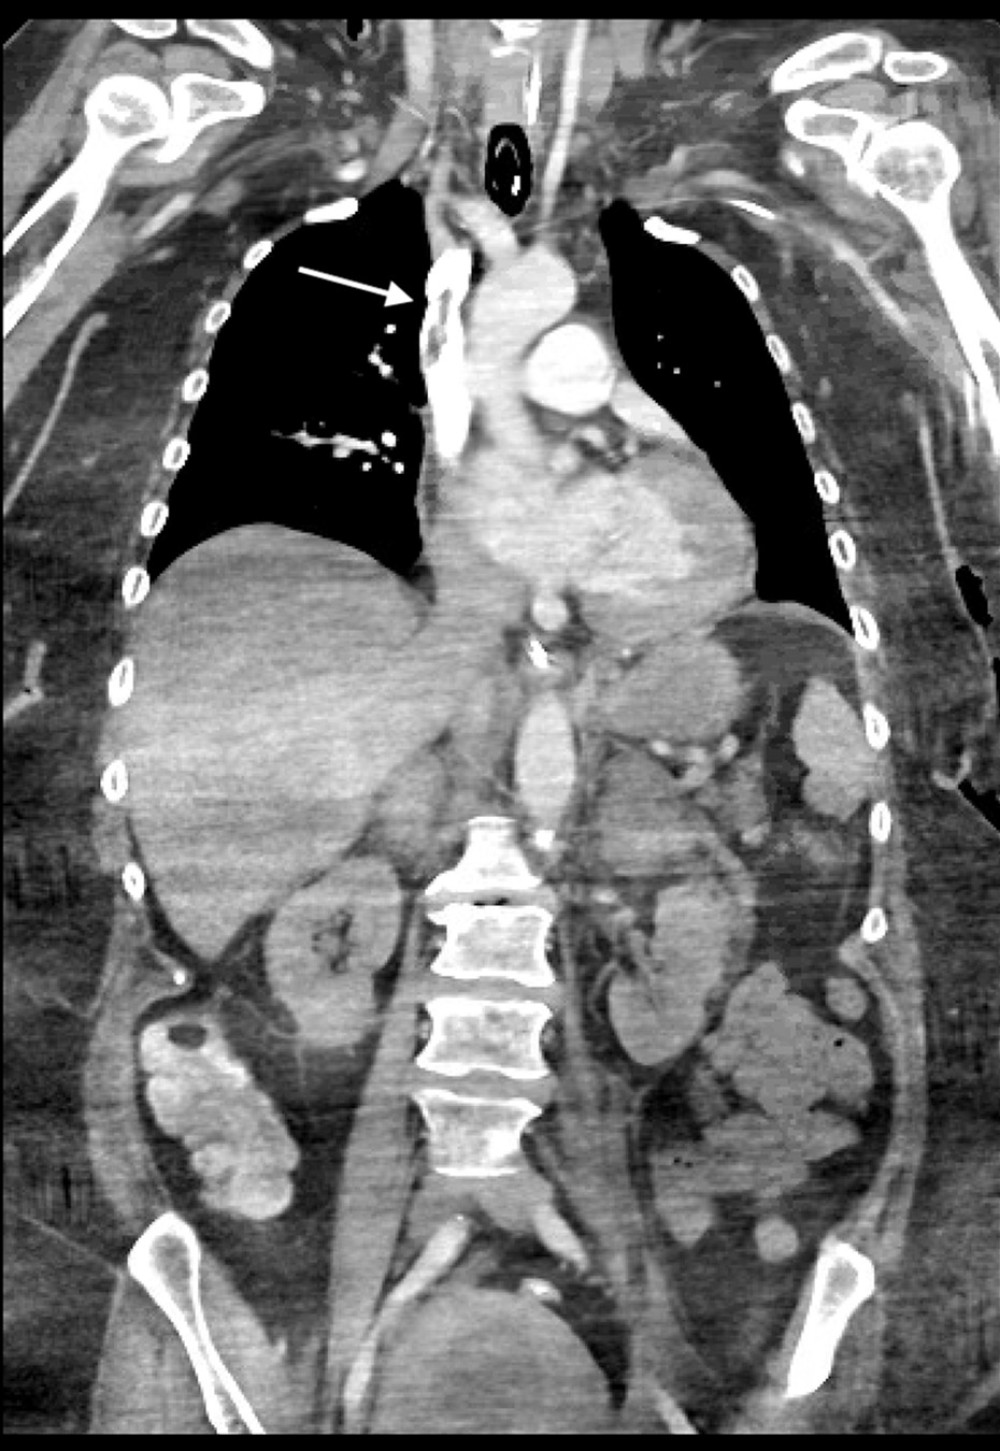 Chest computed tomography revealing a non-occlusive thrombus in the superior vena cava (white arrow).